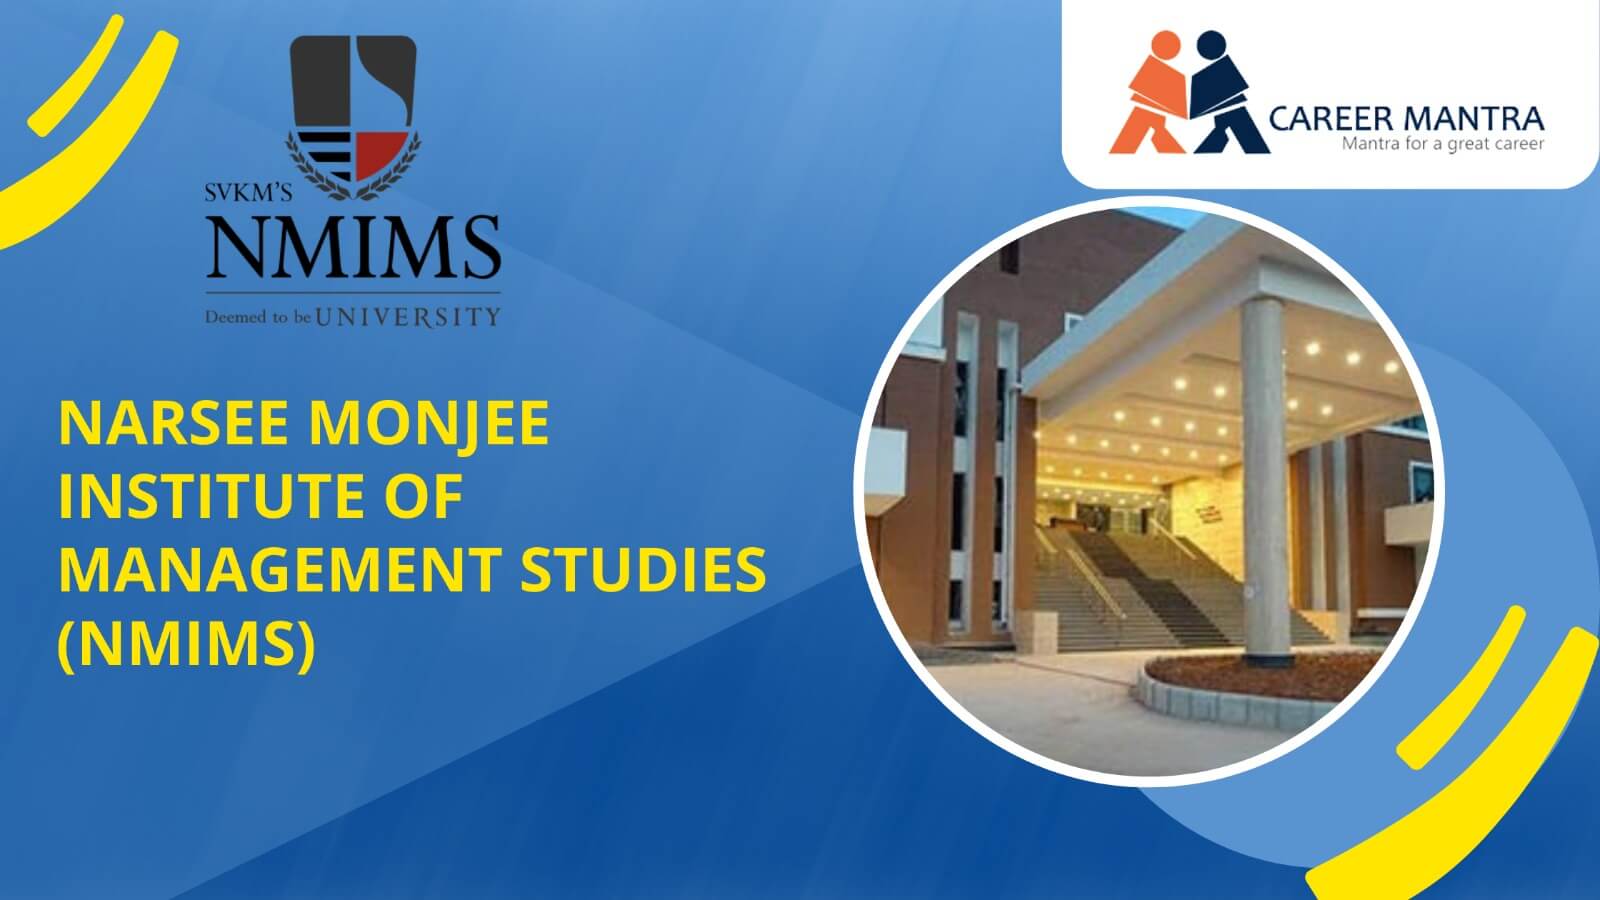 https://www.careermantra.net/blog/narsee-monjee-institute-of-management-studies-nmims/